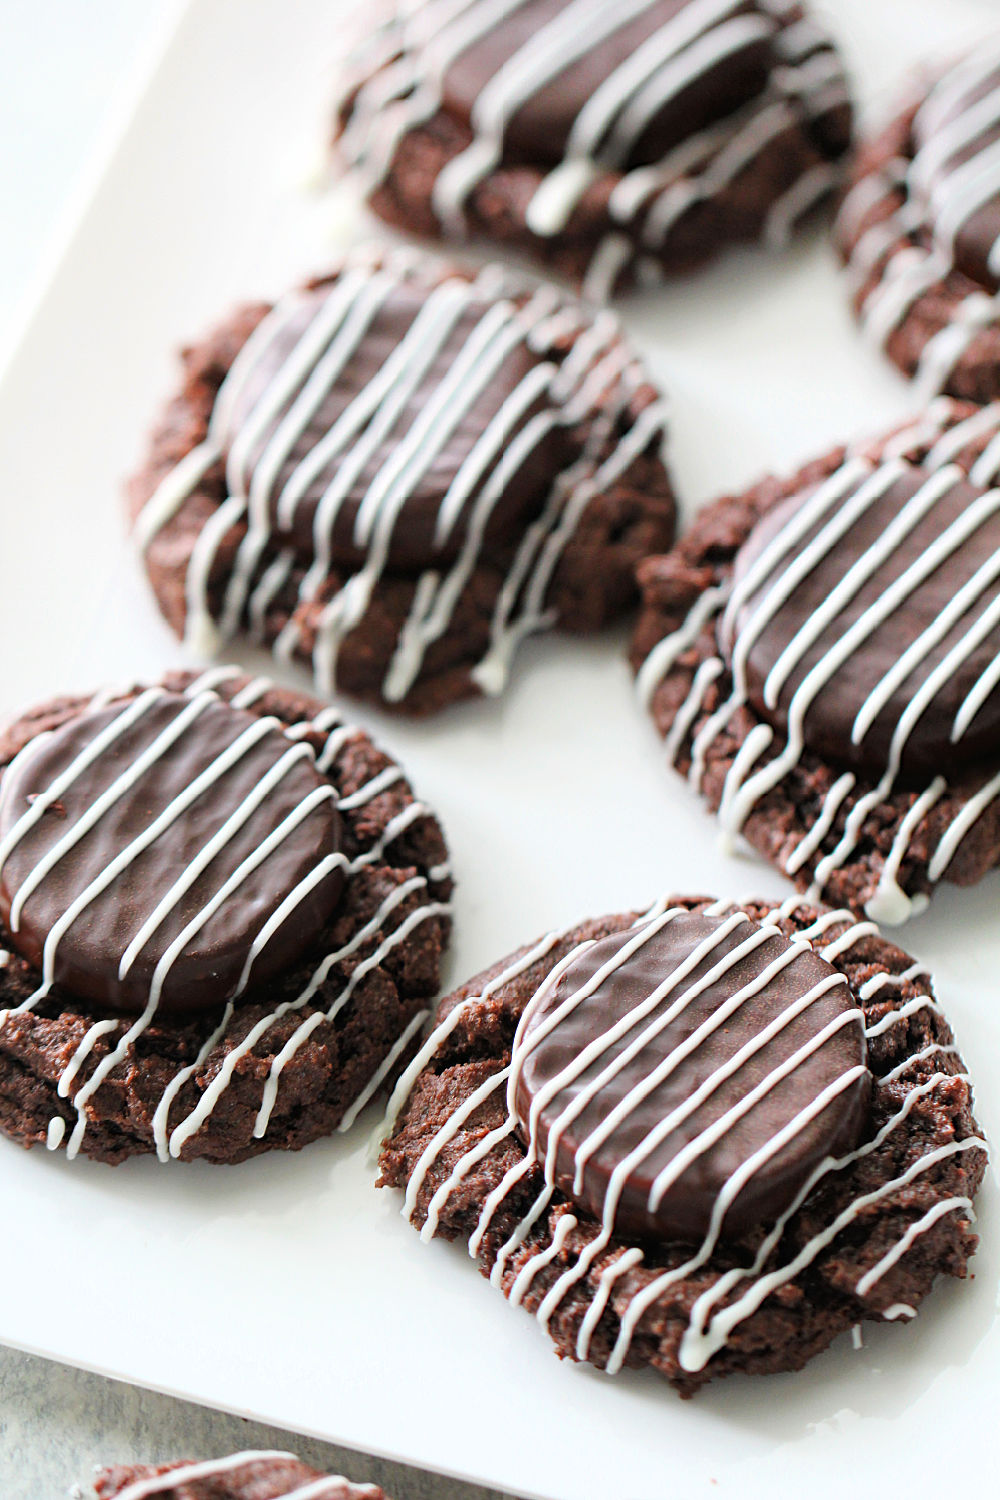 Easy Mint Chocolate Thumbprint Cookies made with a cake mix